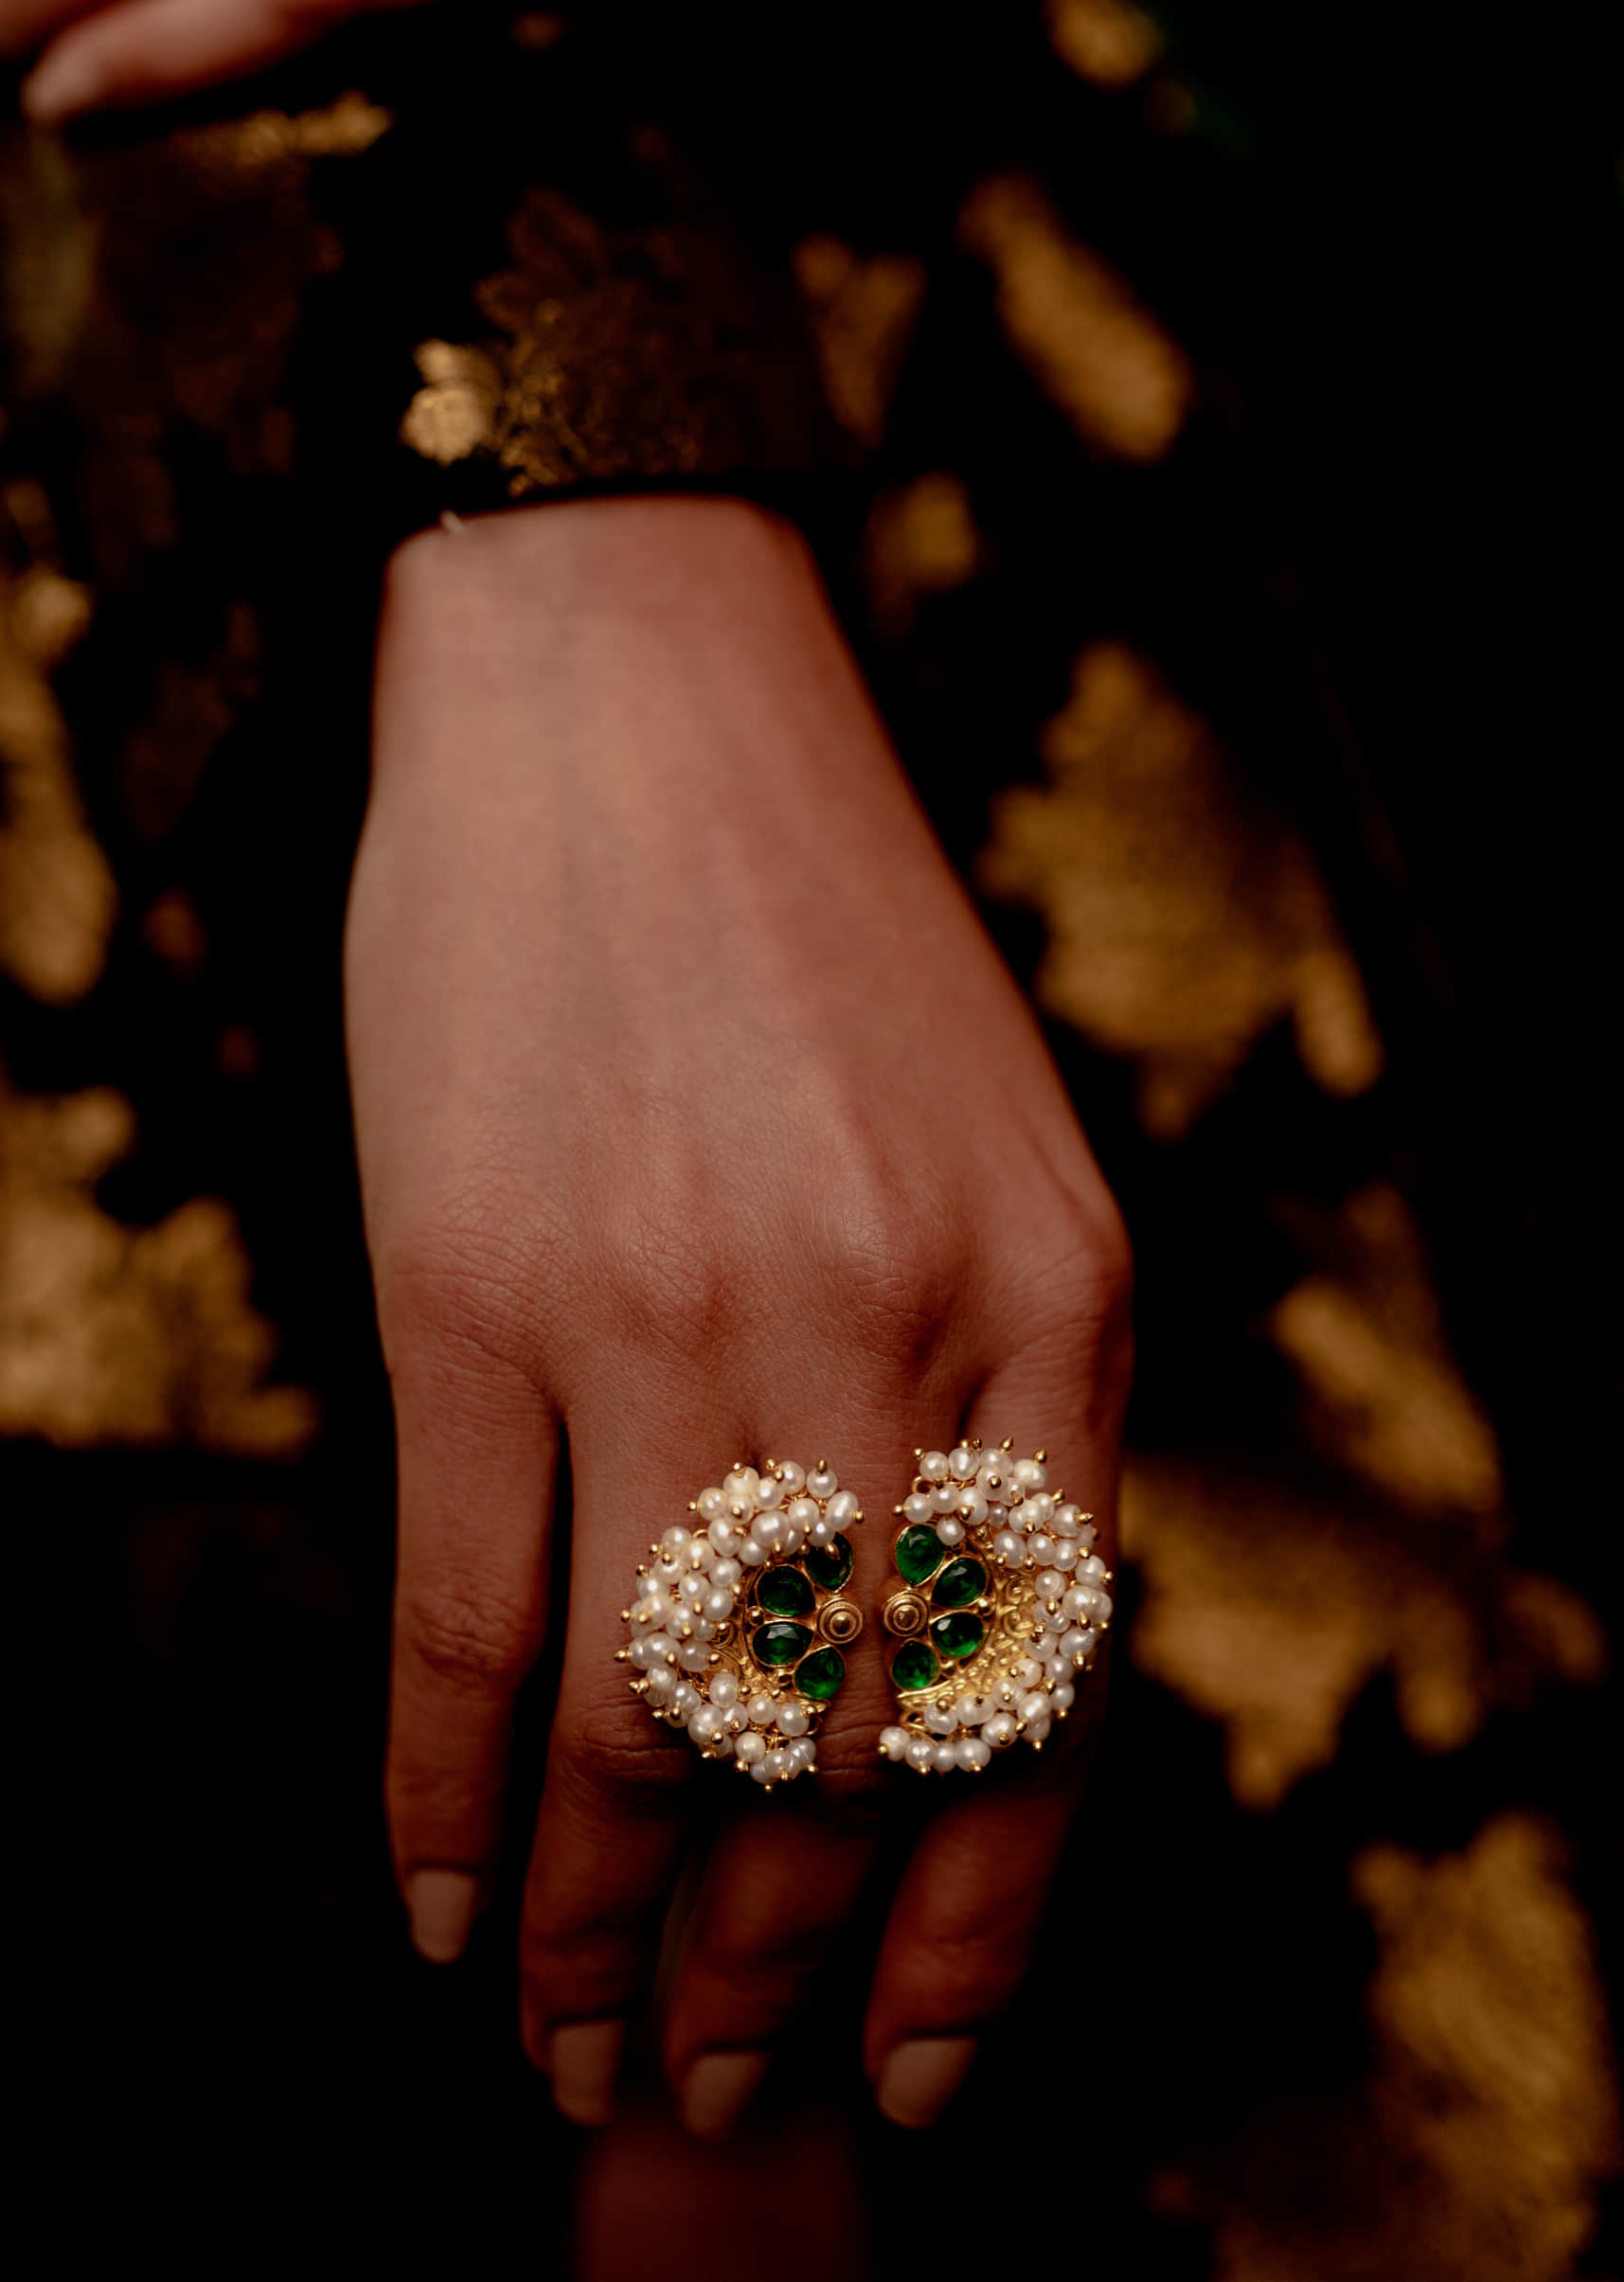 Green Cz Studded Gulmohar Ring With Delicate Filigree And Pearl Detailing By Zariin